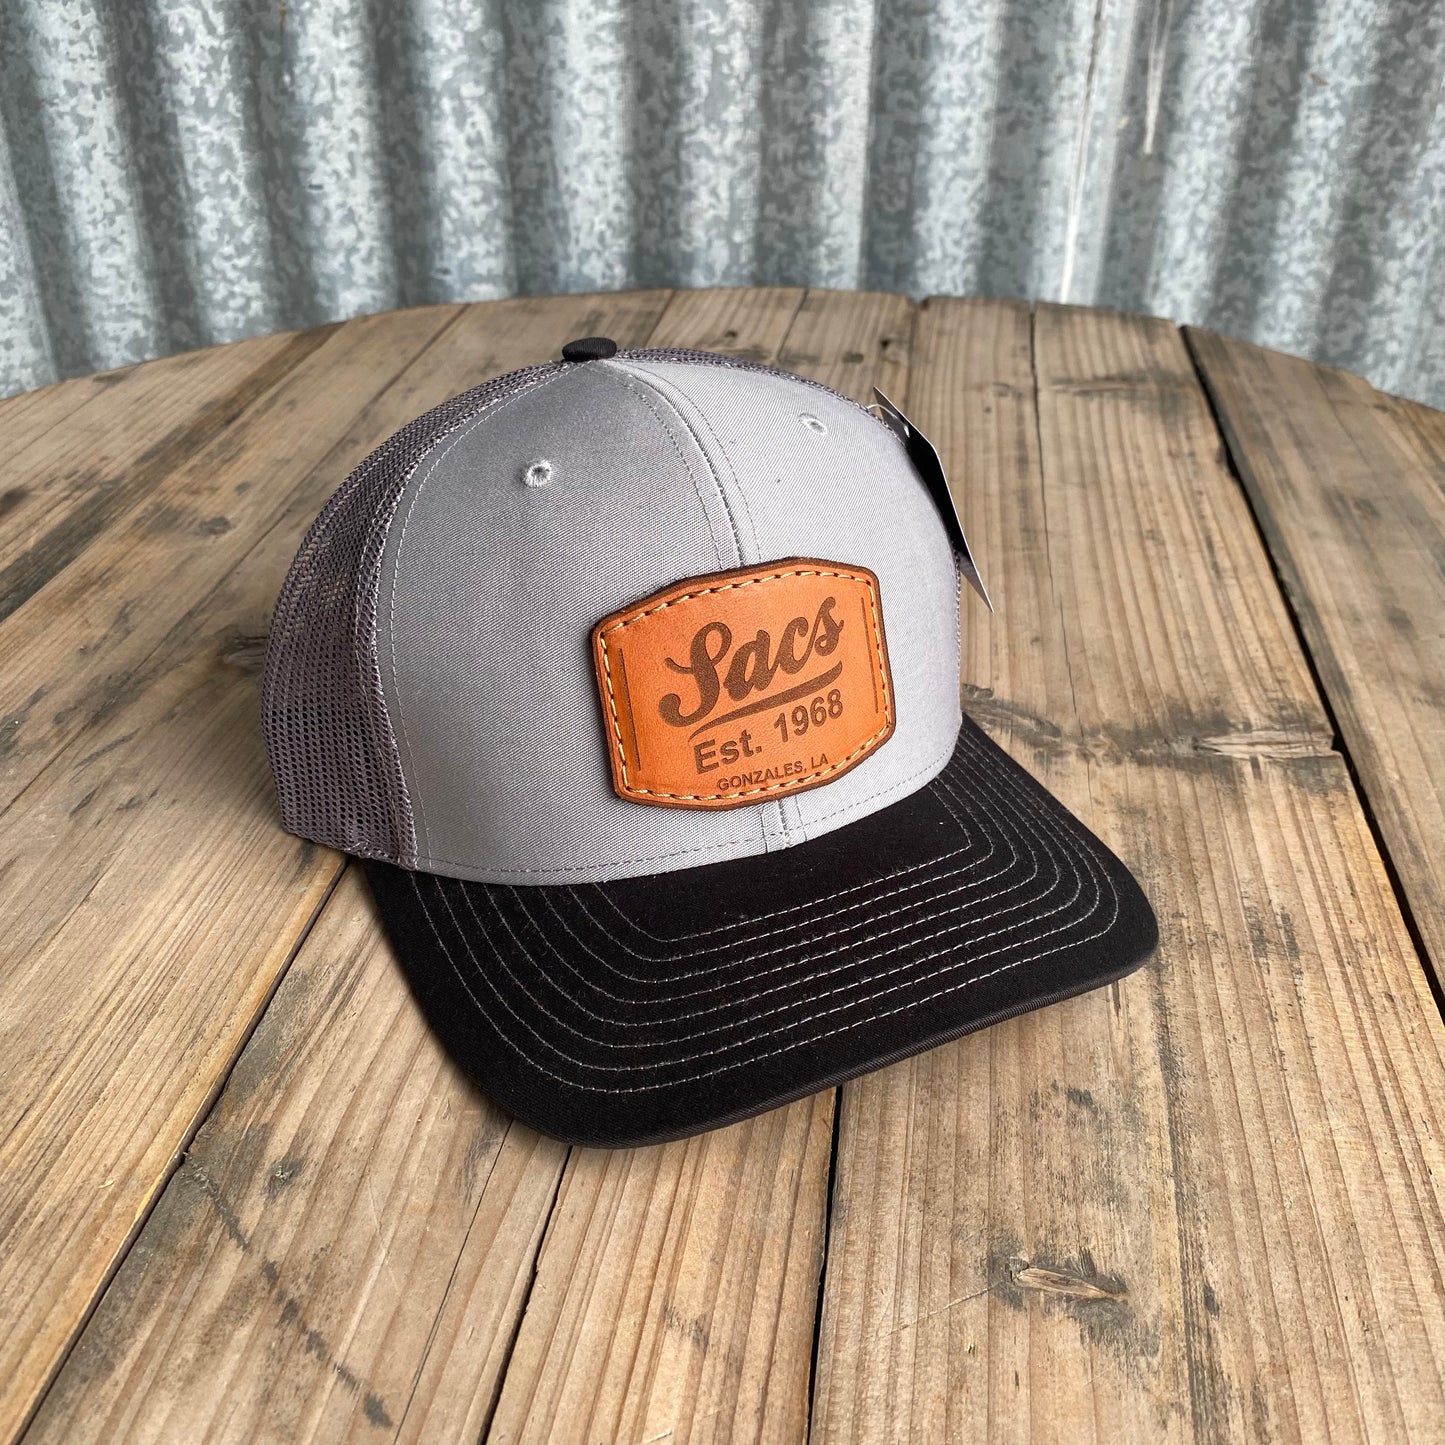 SACS LEATHER PATCH CAP IN GREY/BLACK